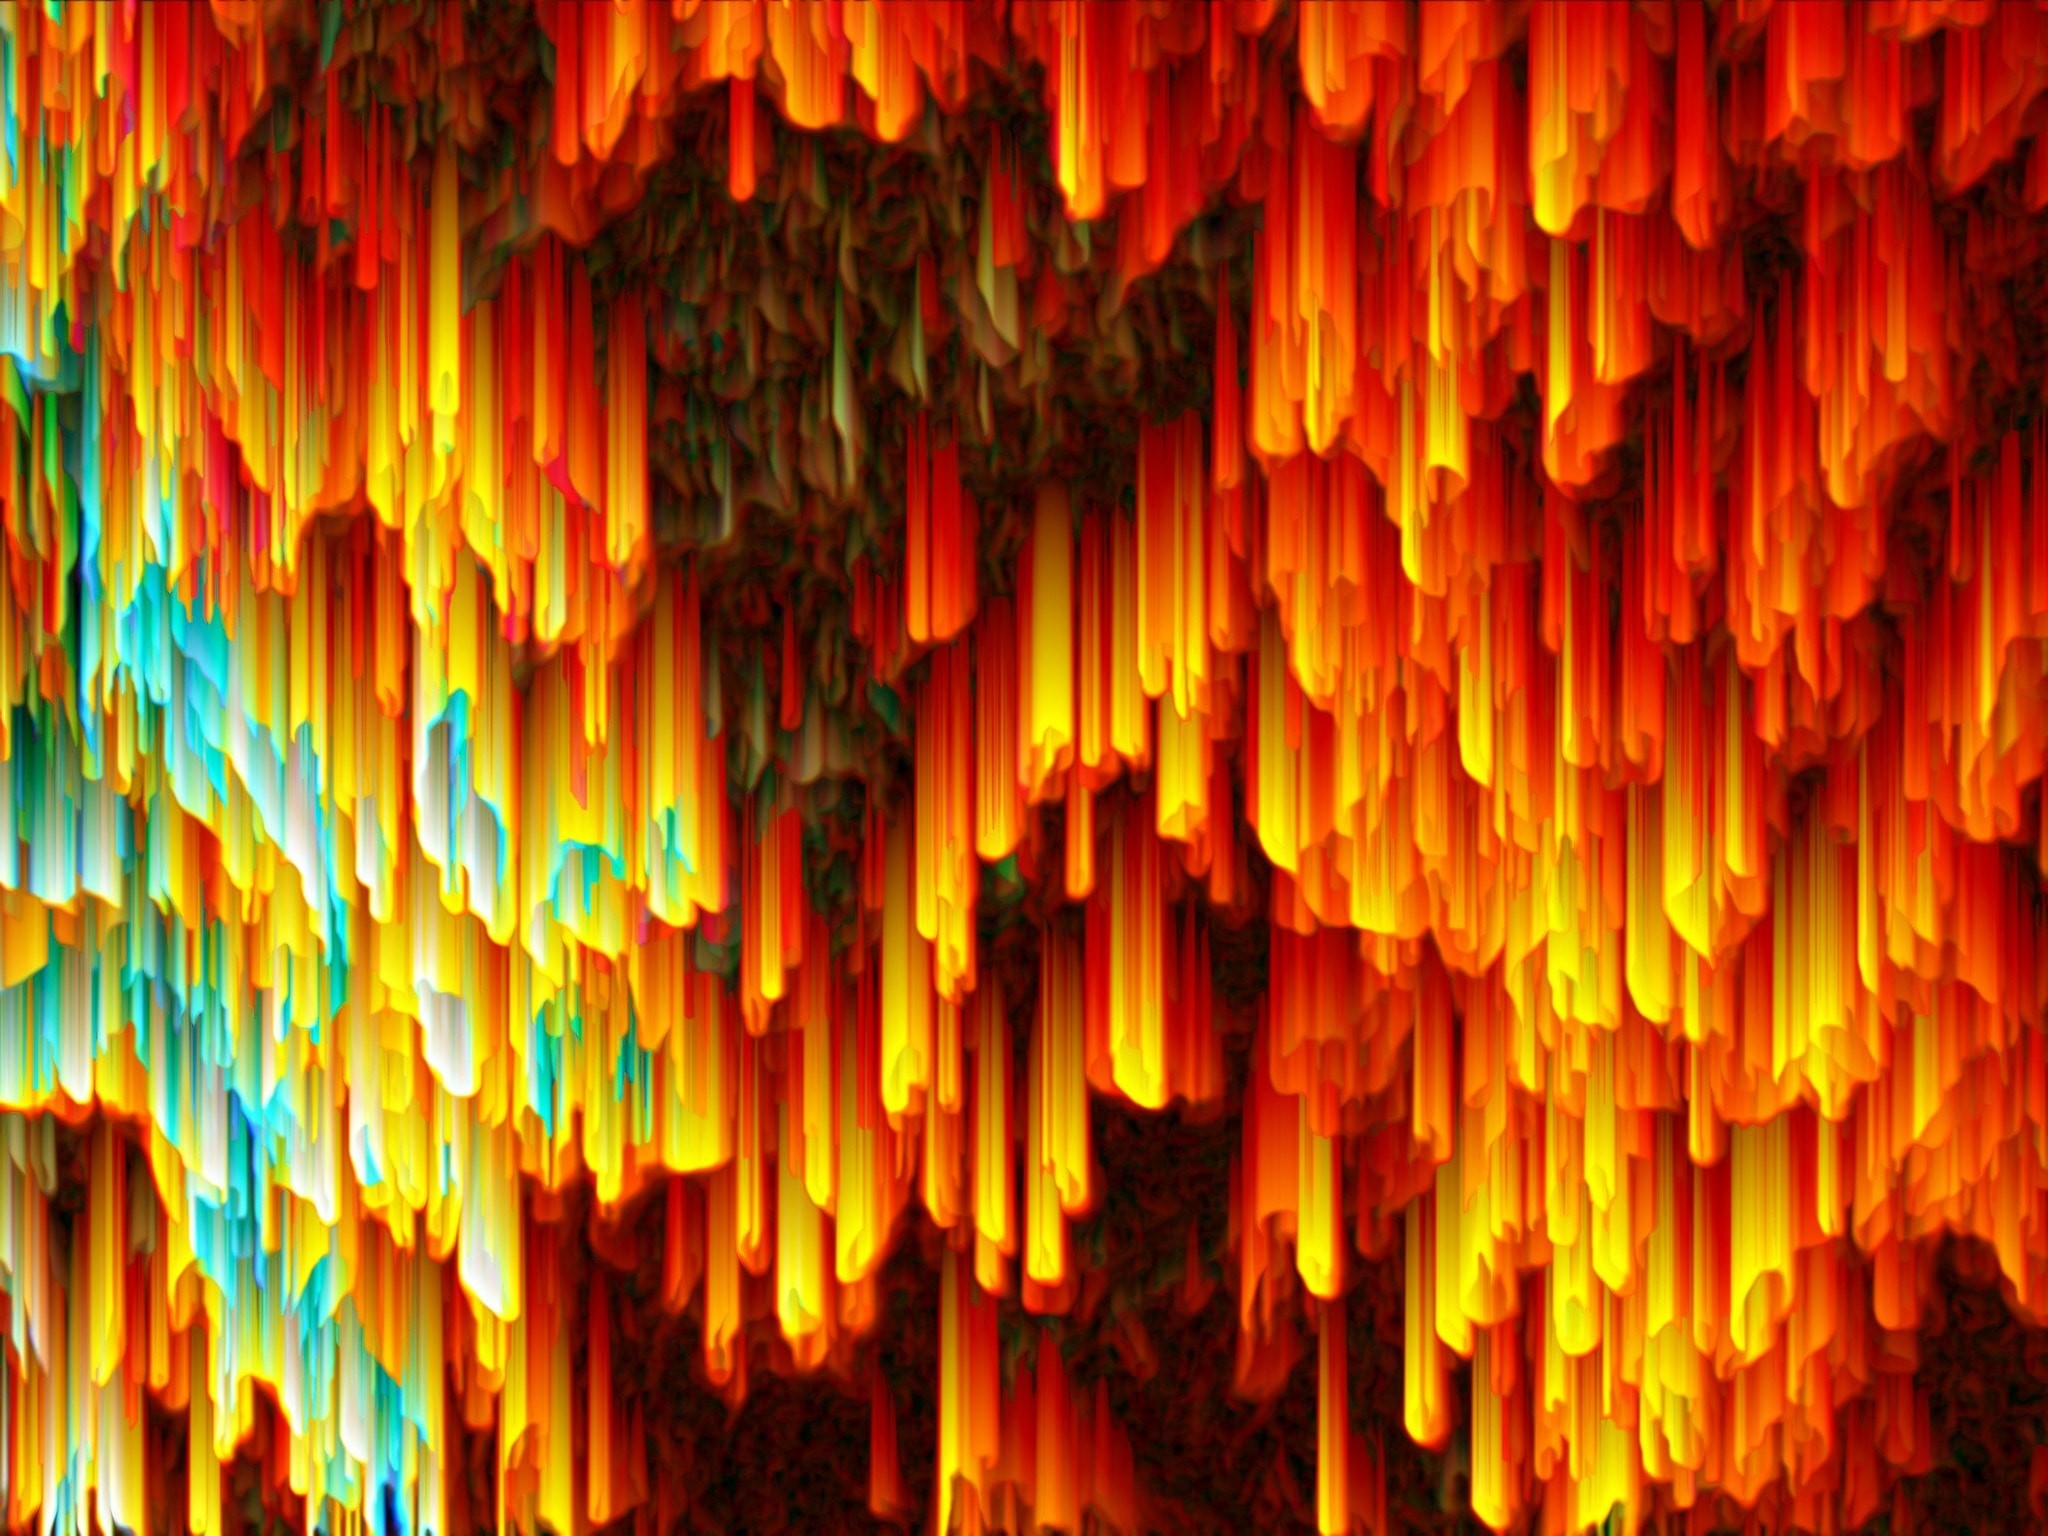 2048x1536 Fire Falling From The Sky Fractal Ultra HD Wallpaper Background Image  DOWNLOAD this and many other